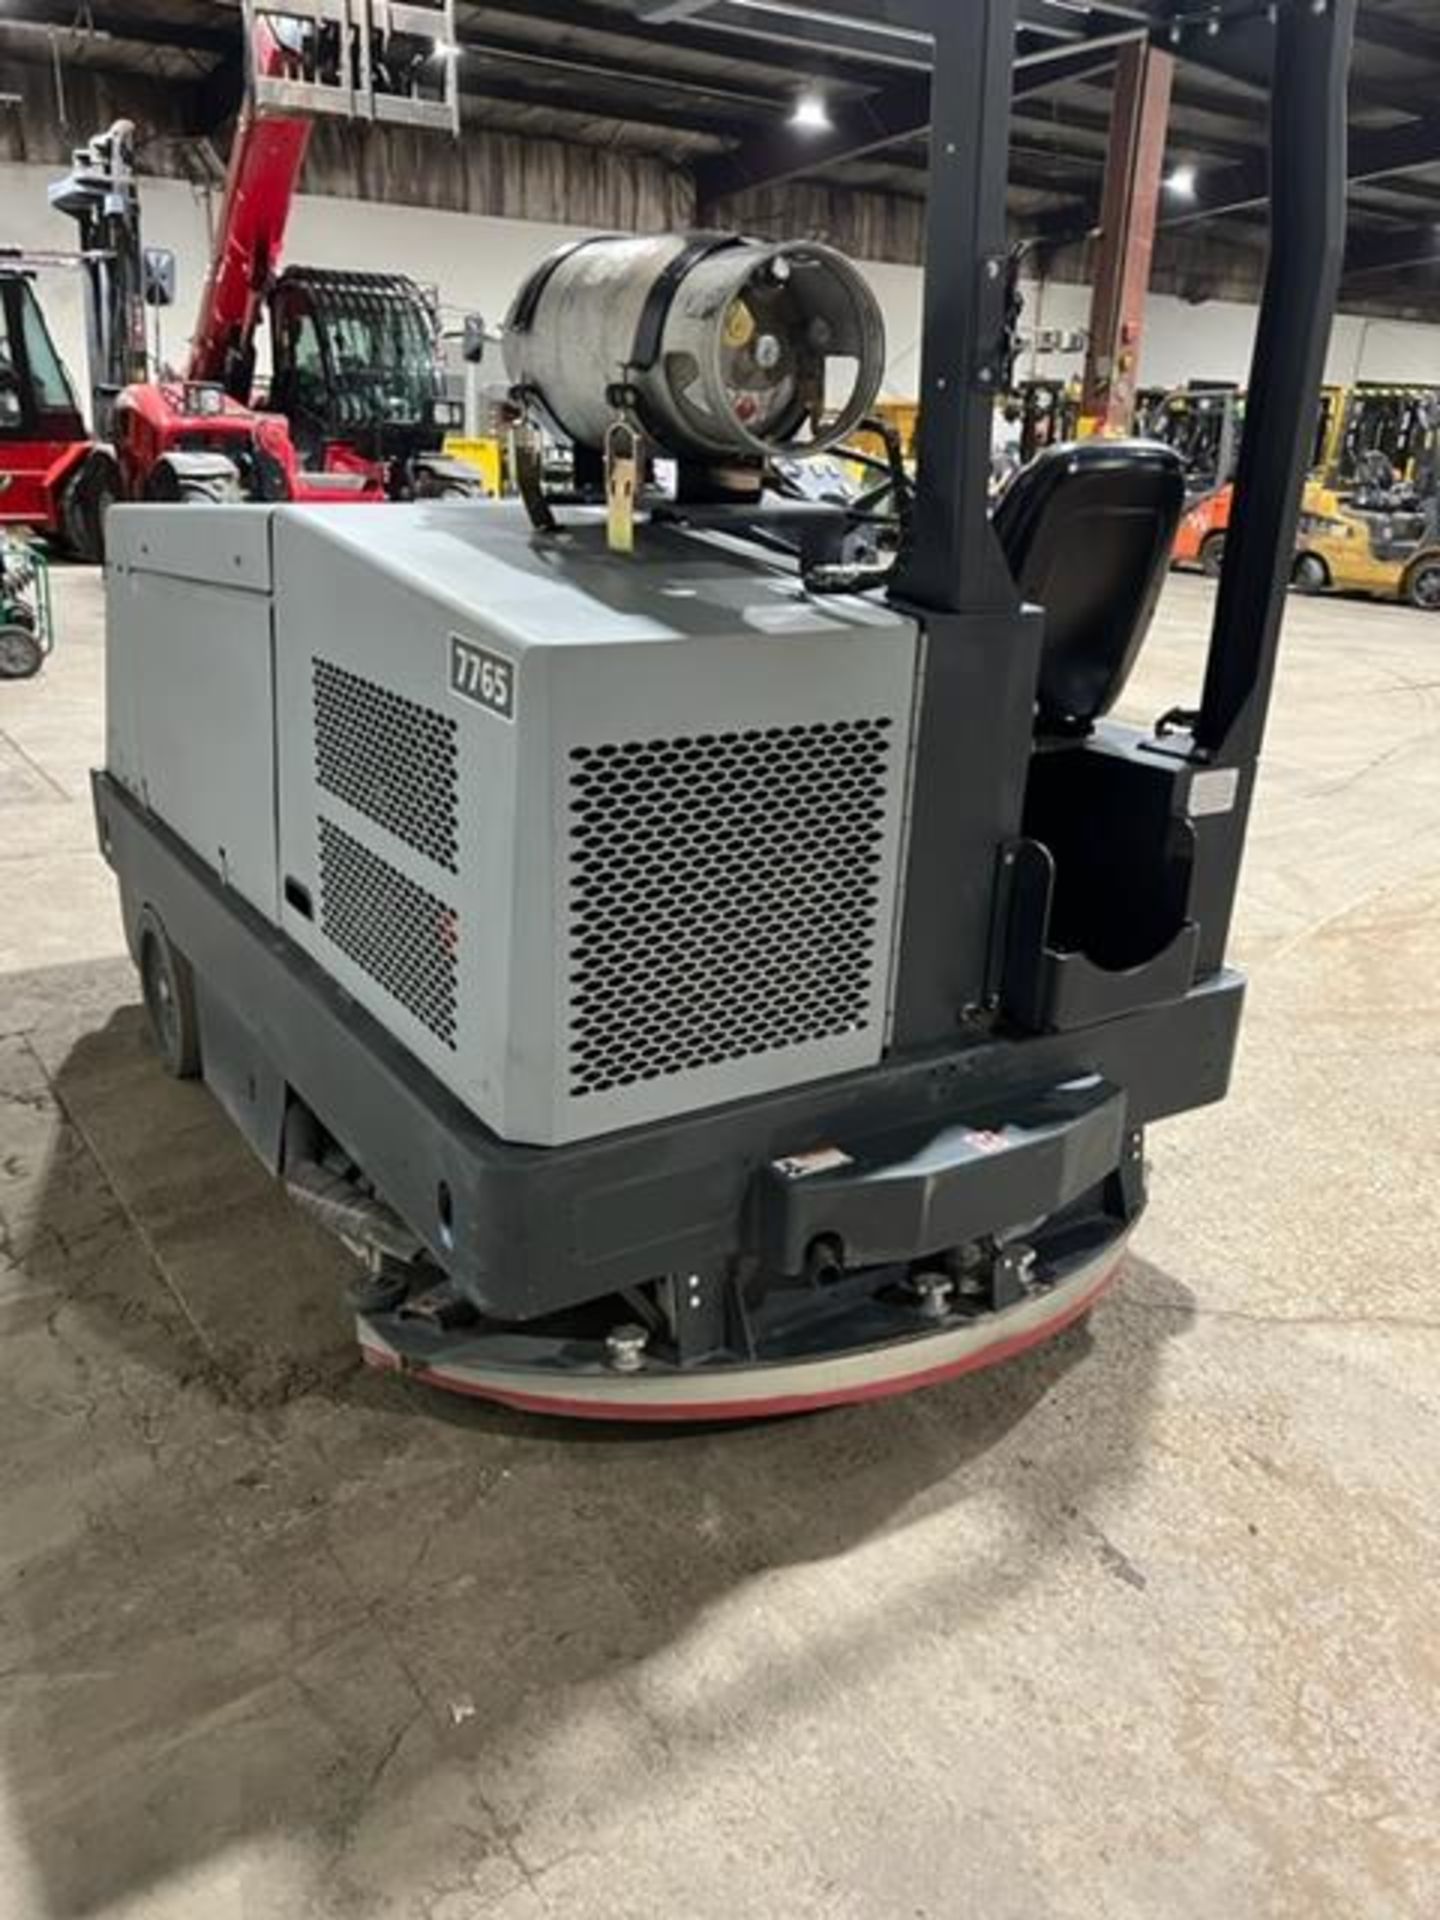 2014 Nilfisk Advance Model 7765 Floor Cleaning Machine Sweeper Scrubber Unit LPG (propane) with - Image 6 of 6